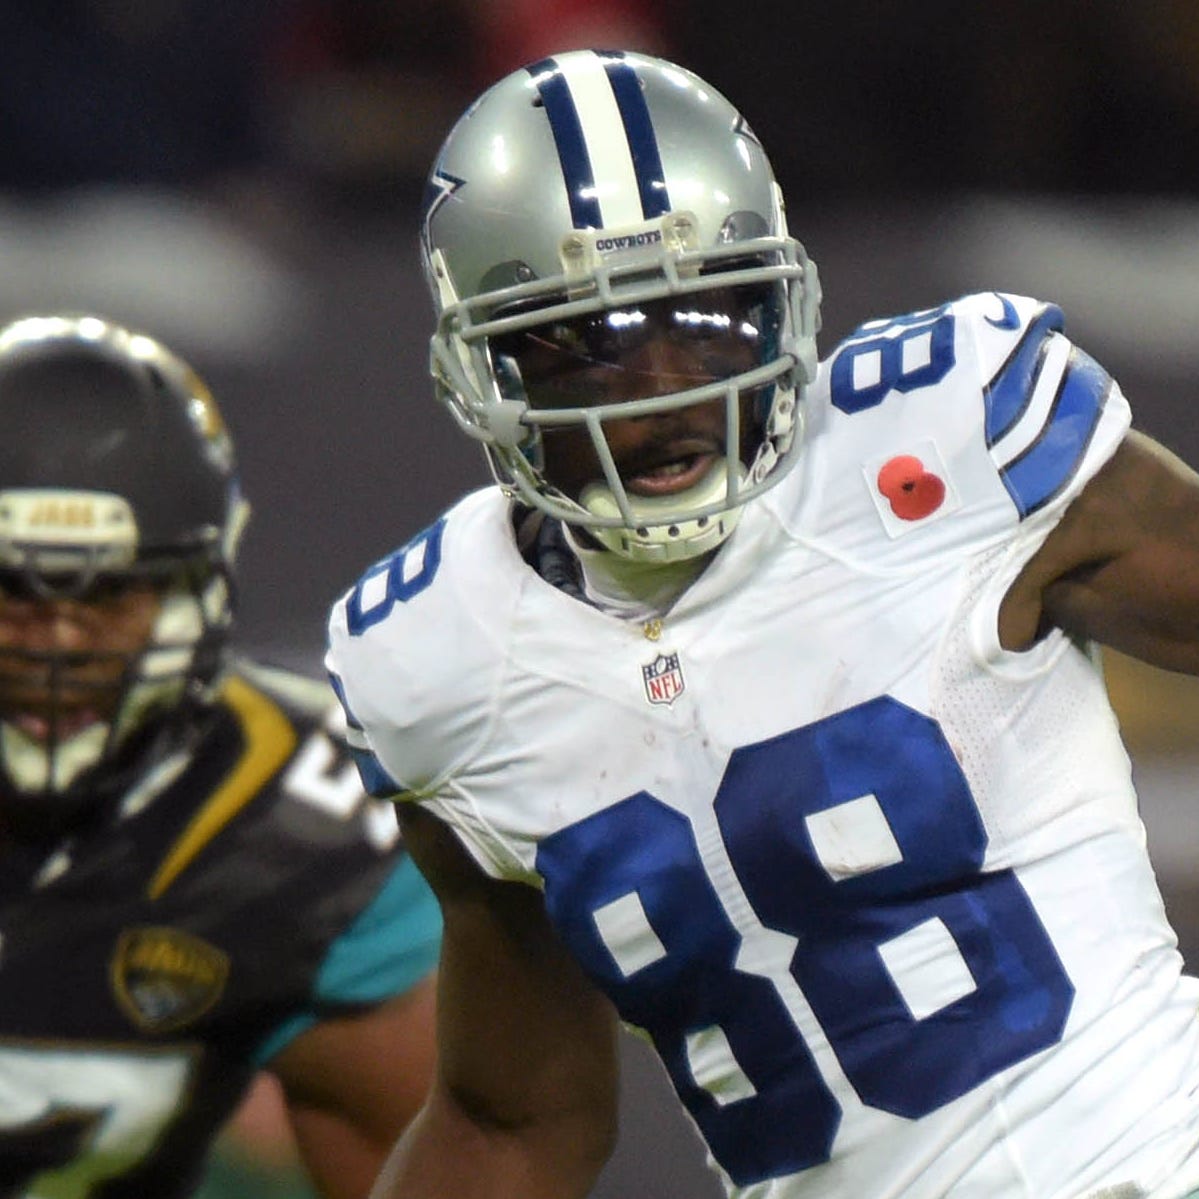 Former Cowboys WR Dez Bryant led the NFL with 16 TD grabs in 2014.